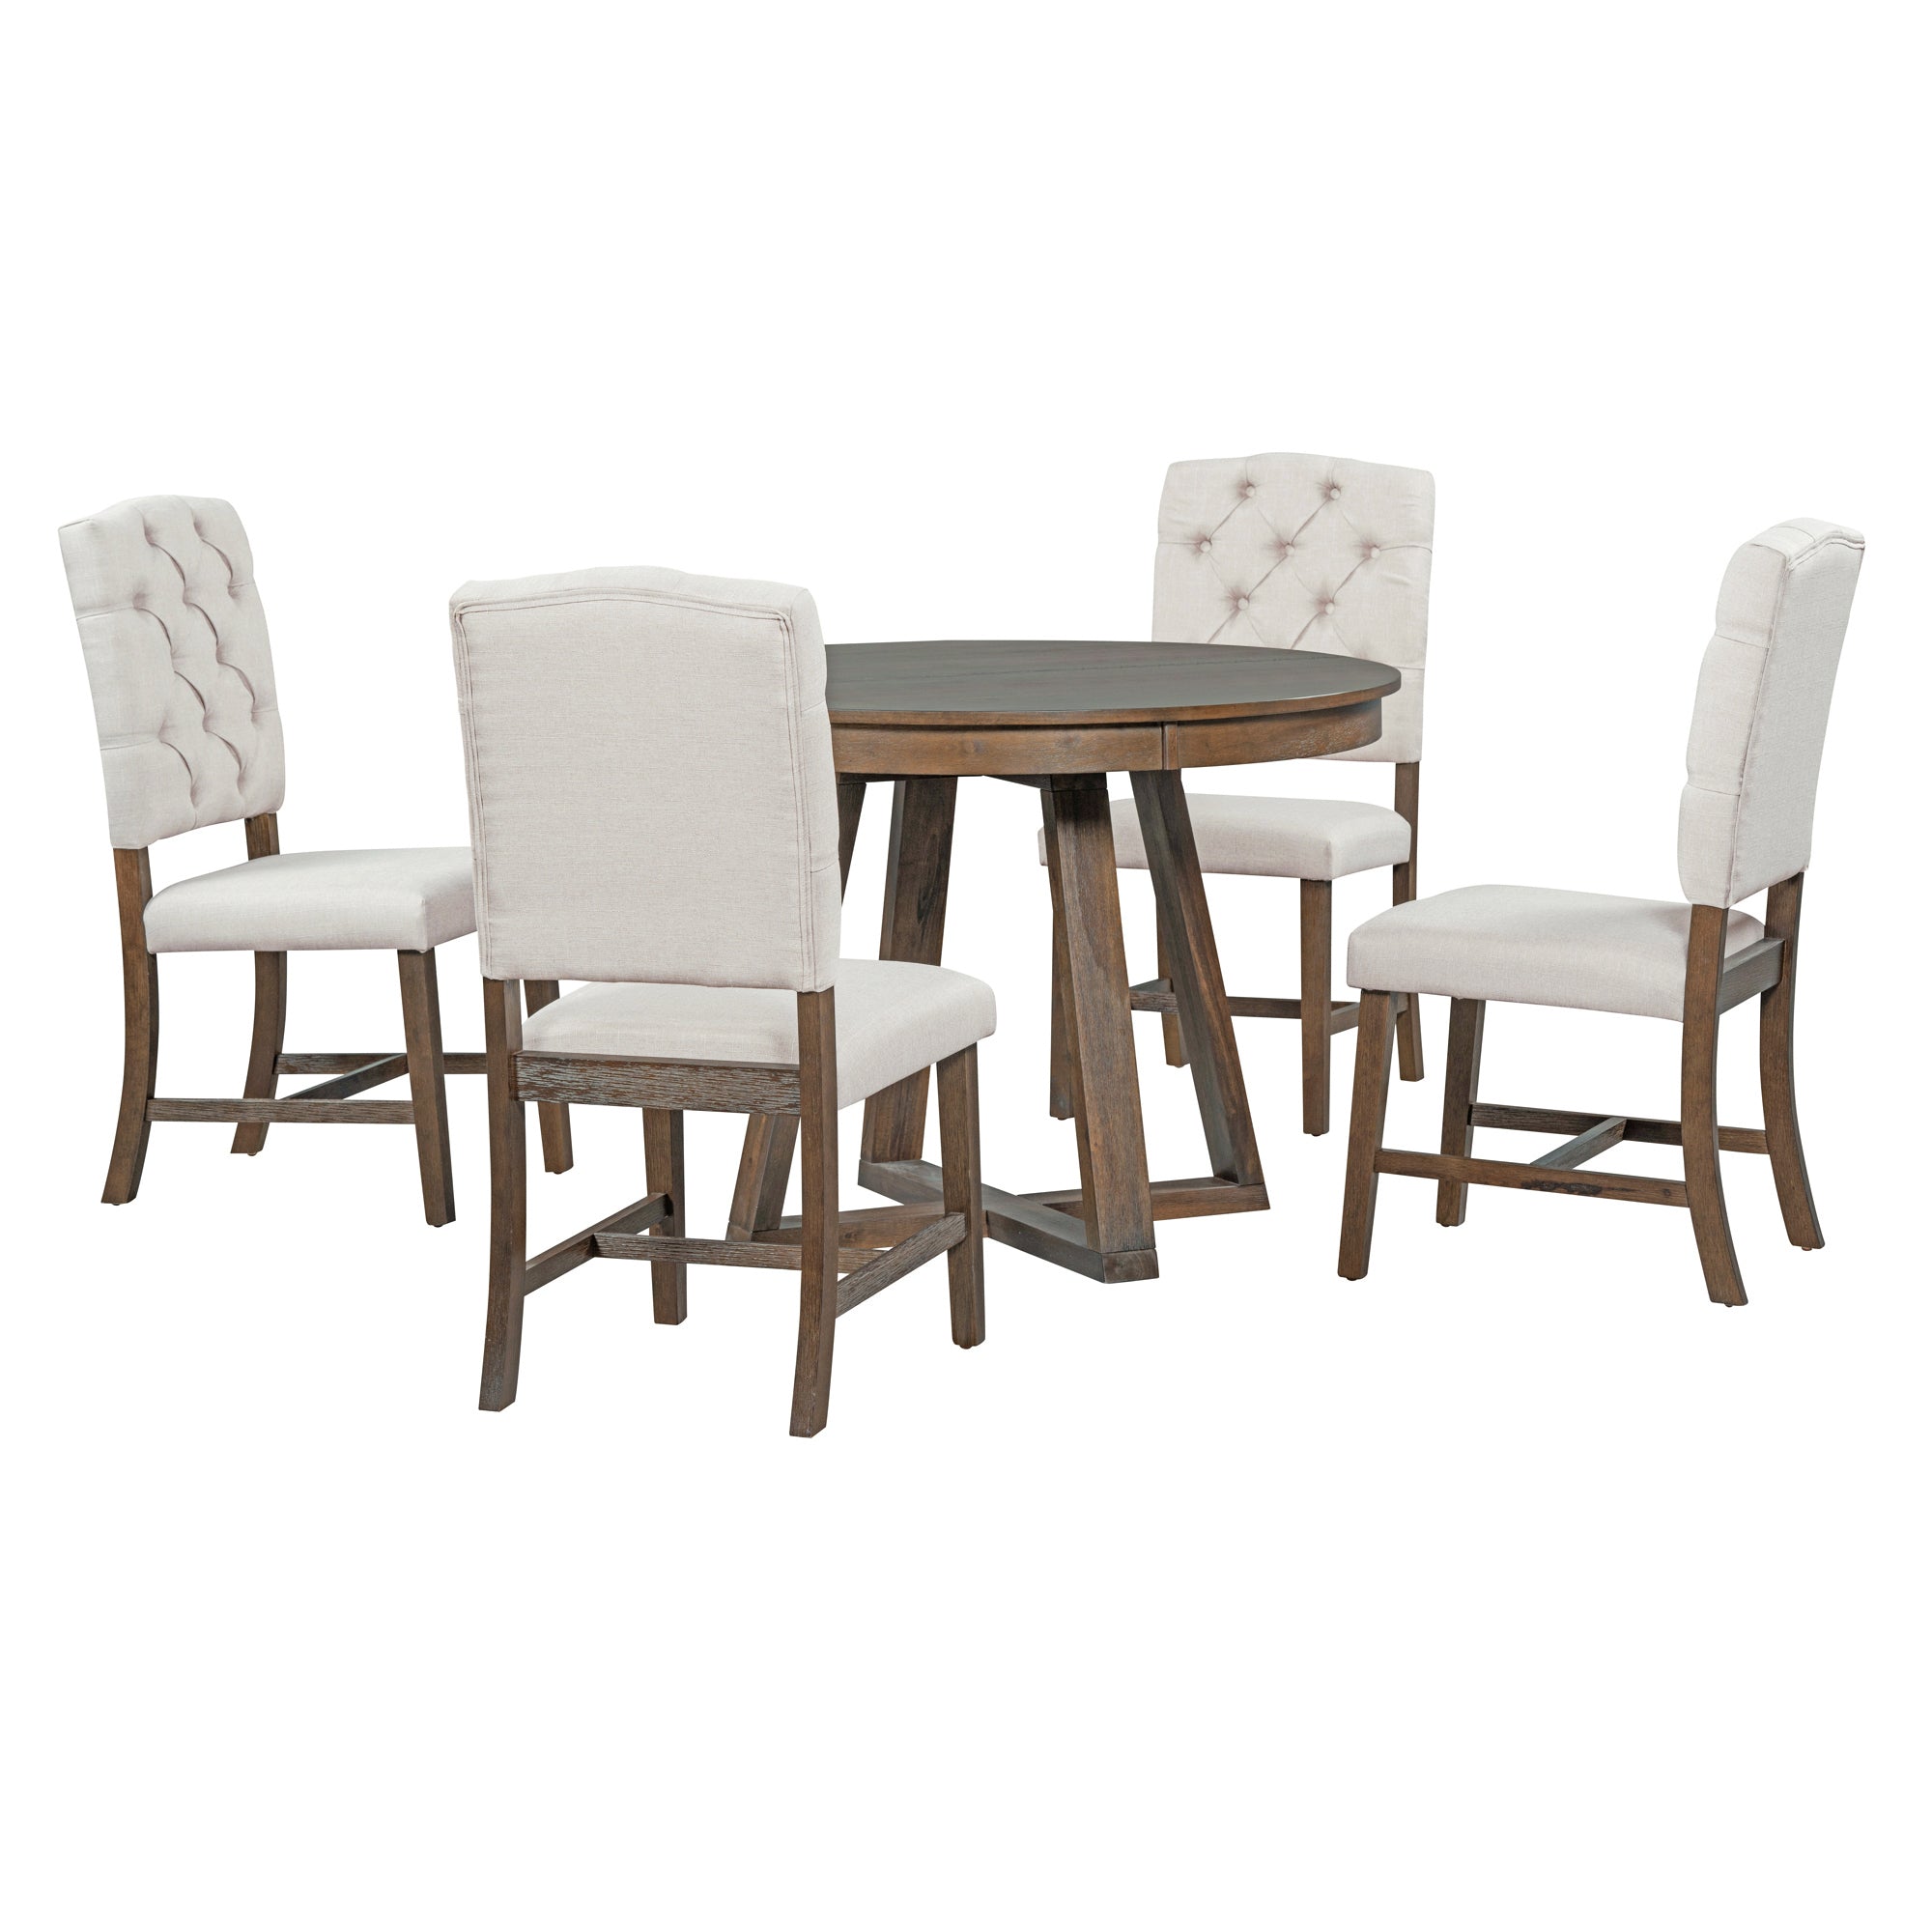 5 Piece Retro Functional Dining Set, Round Table walnut-solid wood